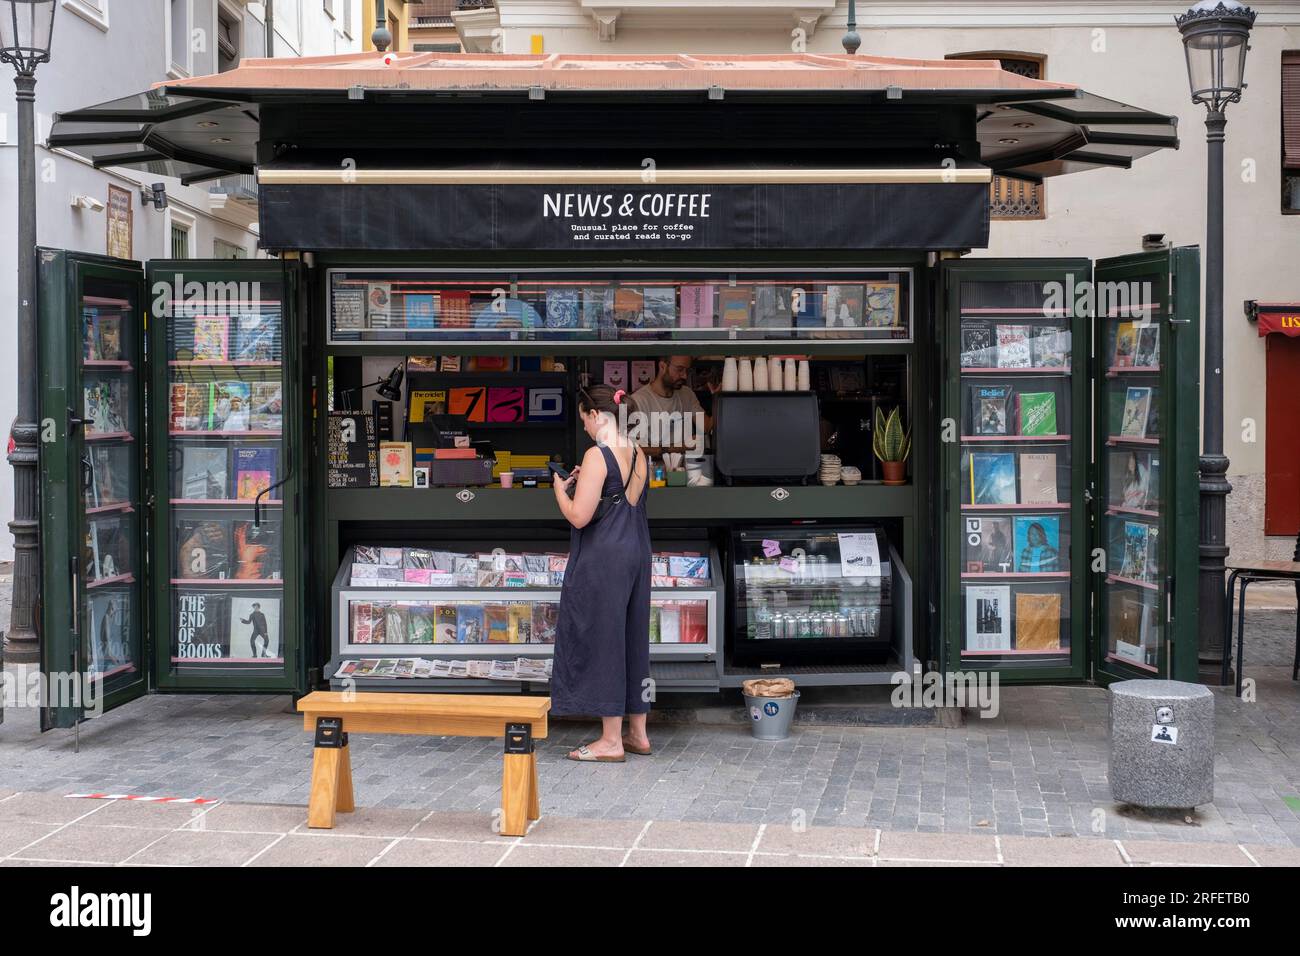 Spain, Valencia, barrio del Carmen, newsstand and cafe Stock Photo